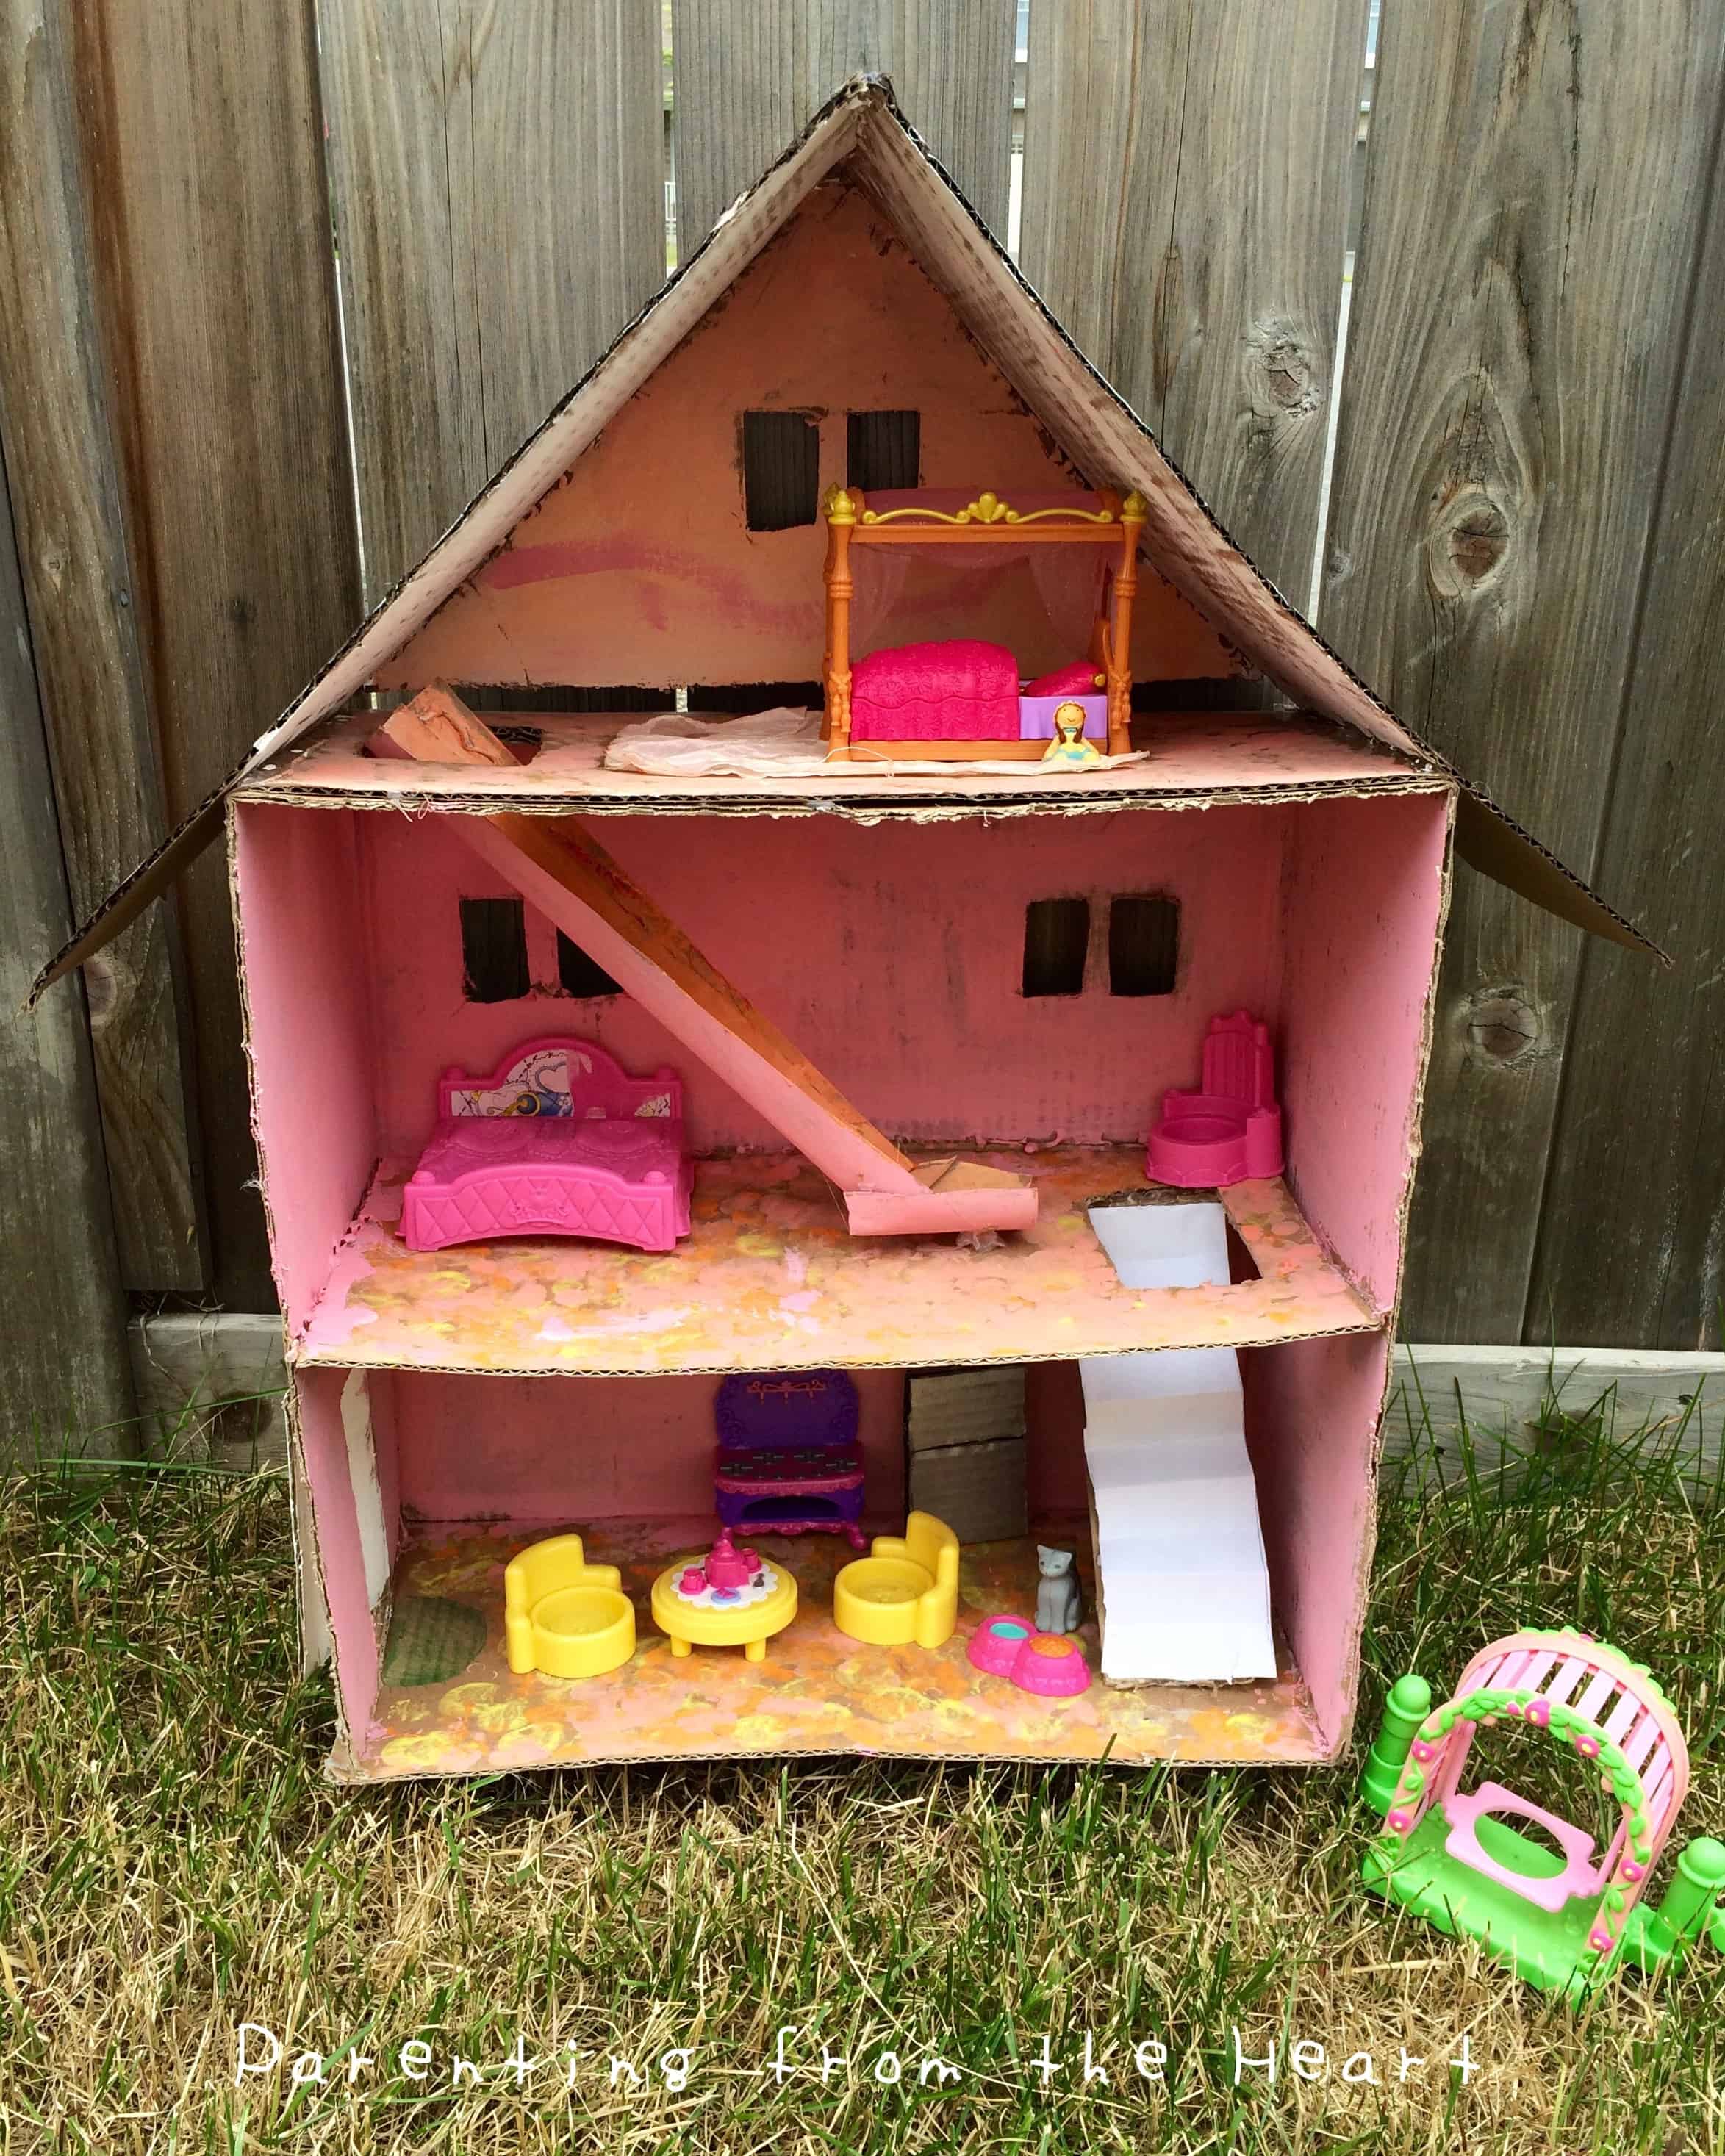 Take Your DIY Cardboard Dollhouse To the Next Level